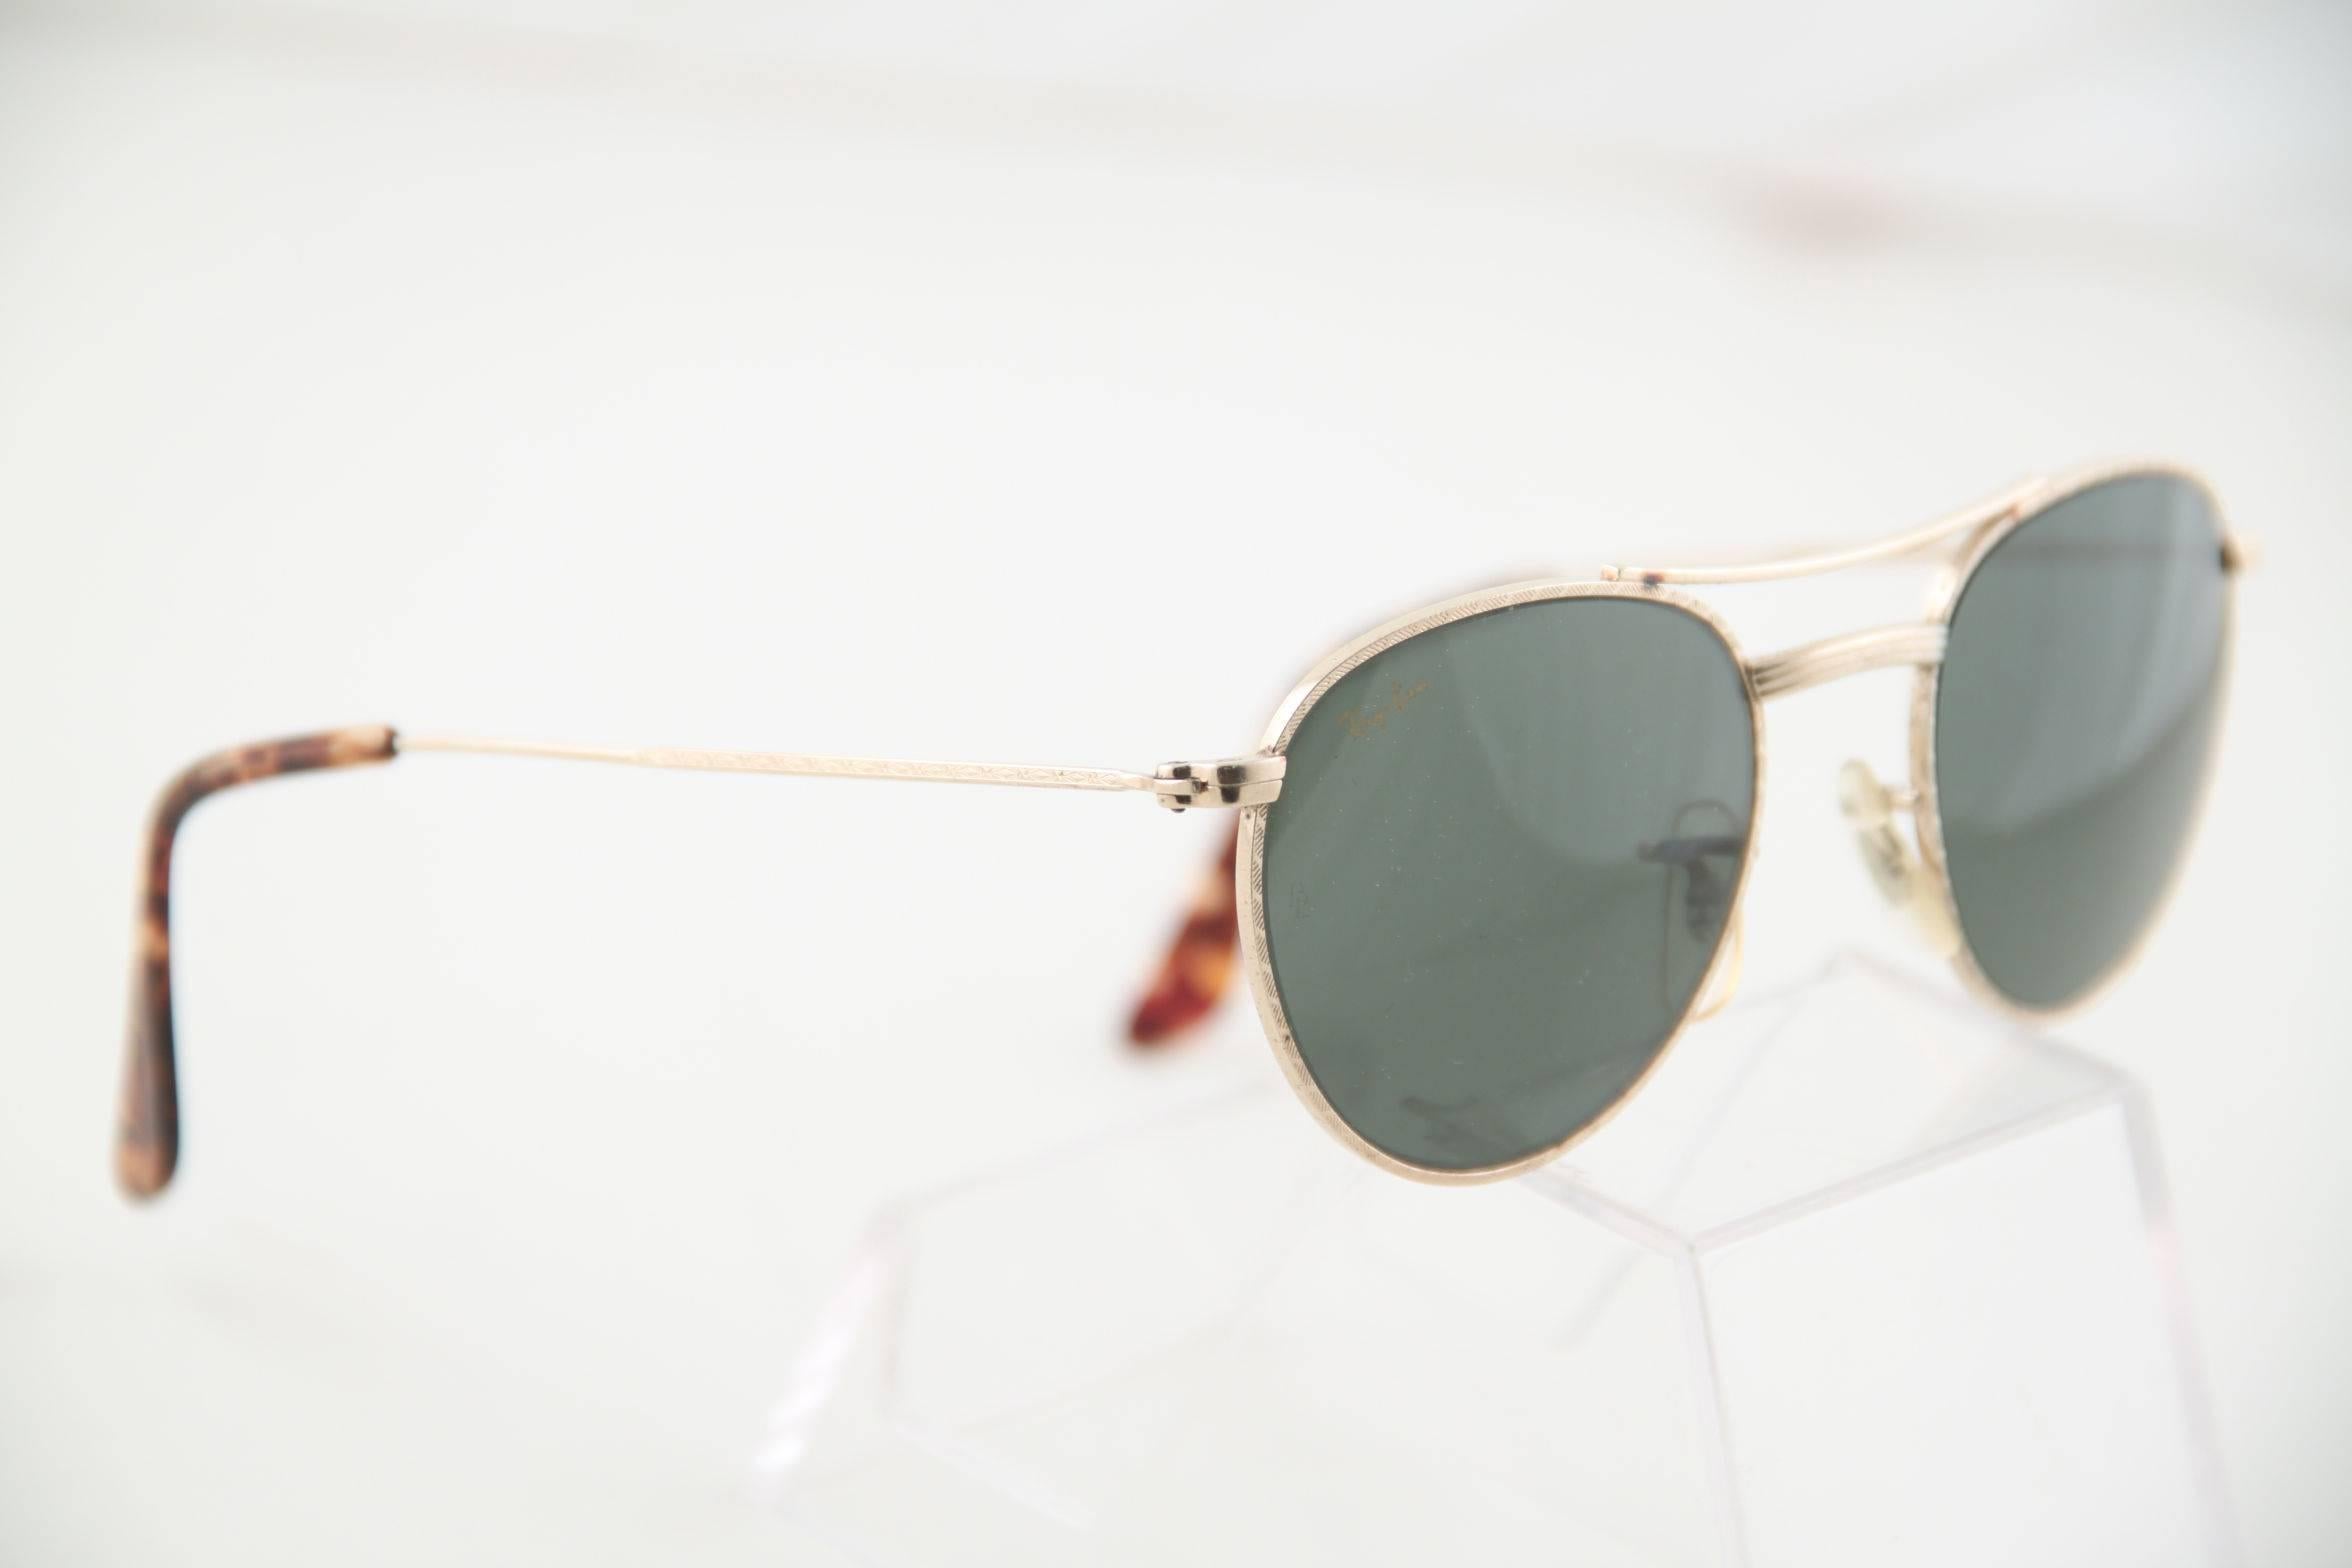  - Model: Ray Ban W 11754

- Cool variation of traditional aviator glasses

- Gold metal frame with original G15 lenses

- BL etched on each lens

- RAY BAN gold logo printed on RIGHT lens

- Come with a RAY BAN case

Any other detial which is not